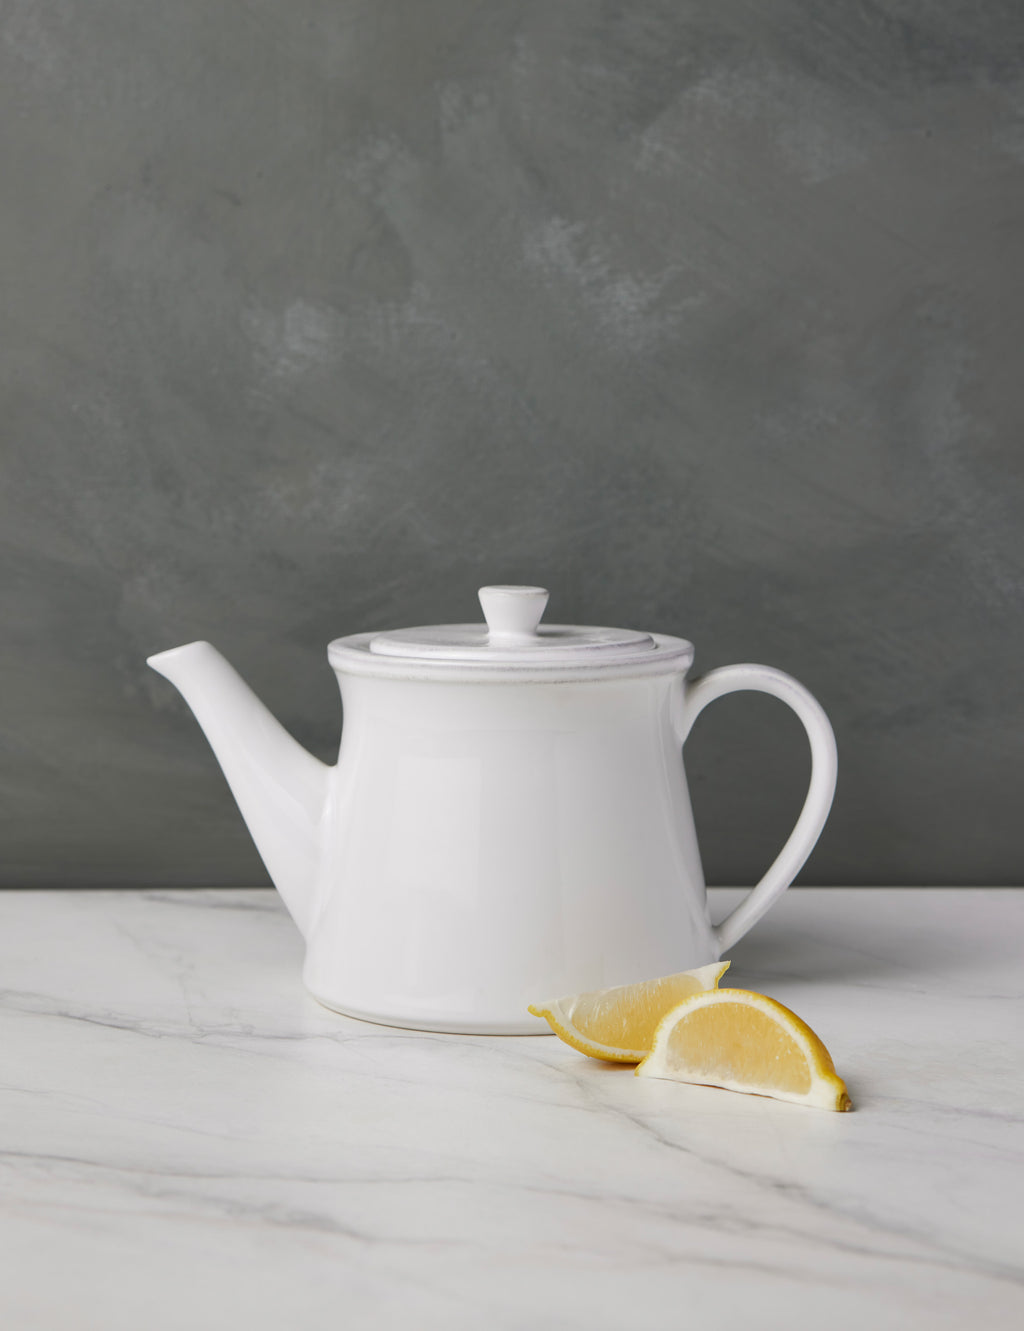 White Country Rose Ceramic Kettle - 1L – Jean Patrique Professional Cookware